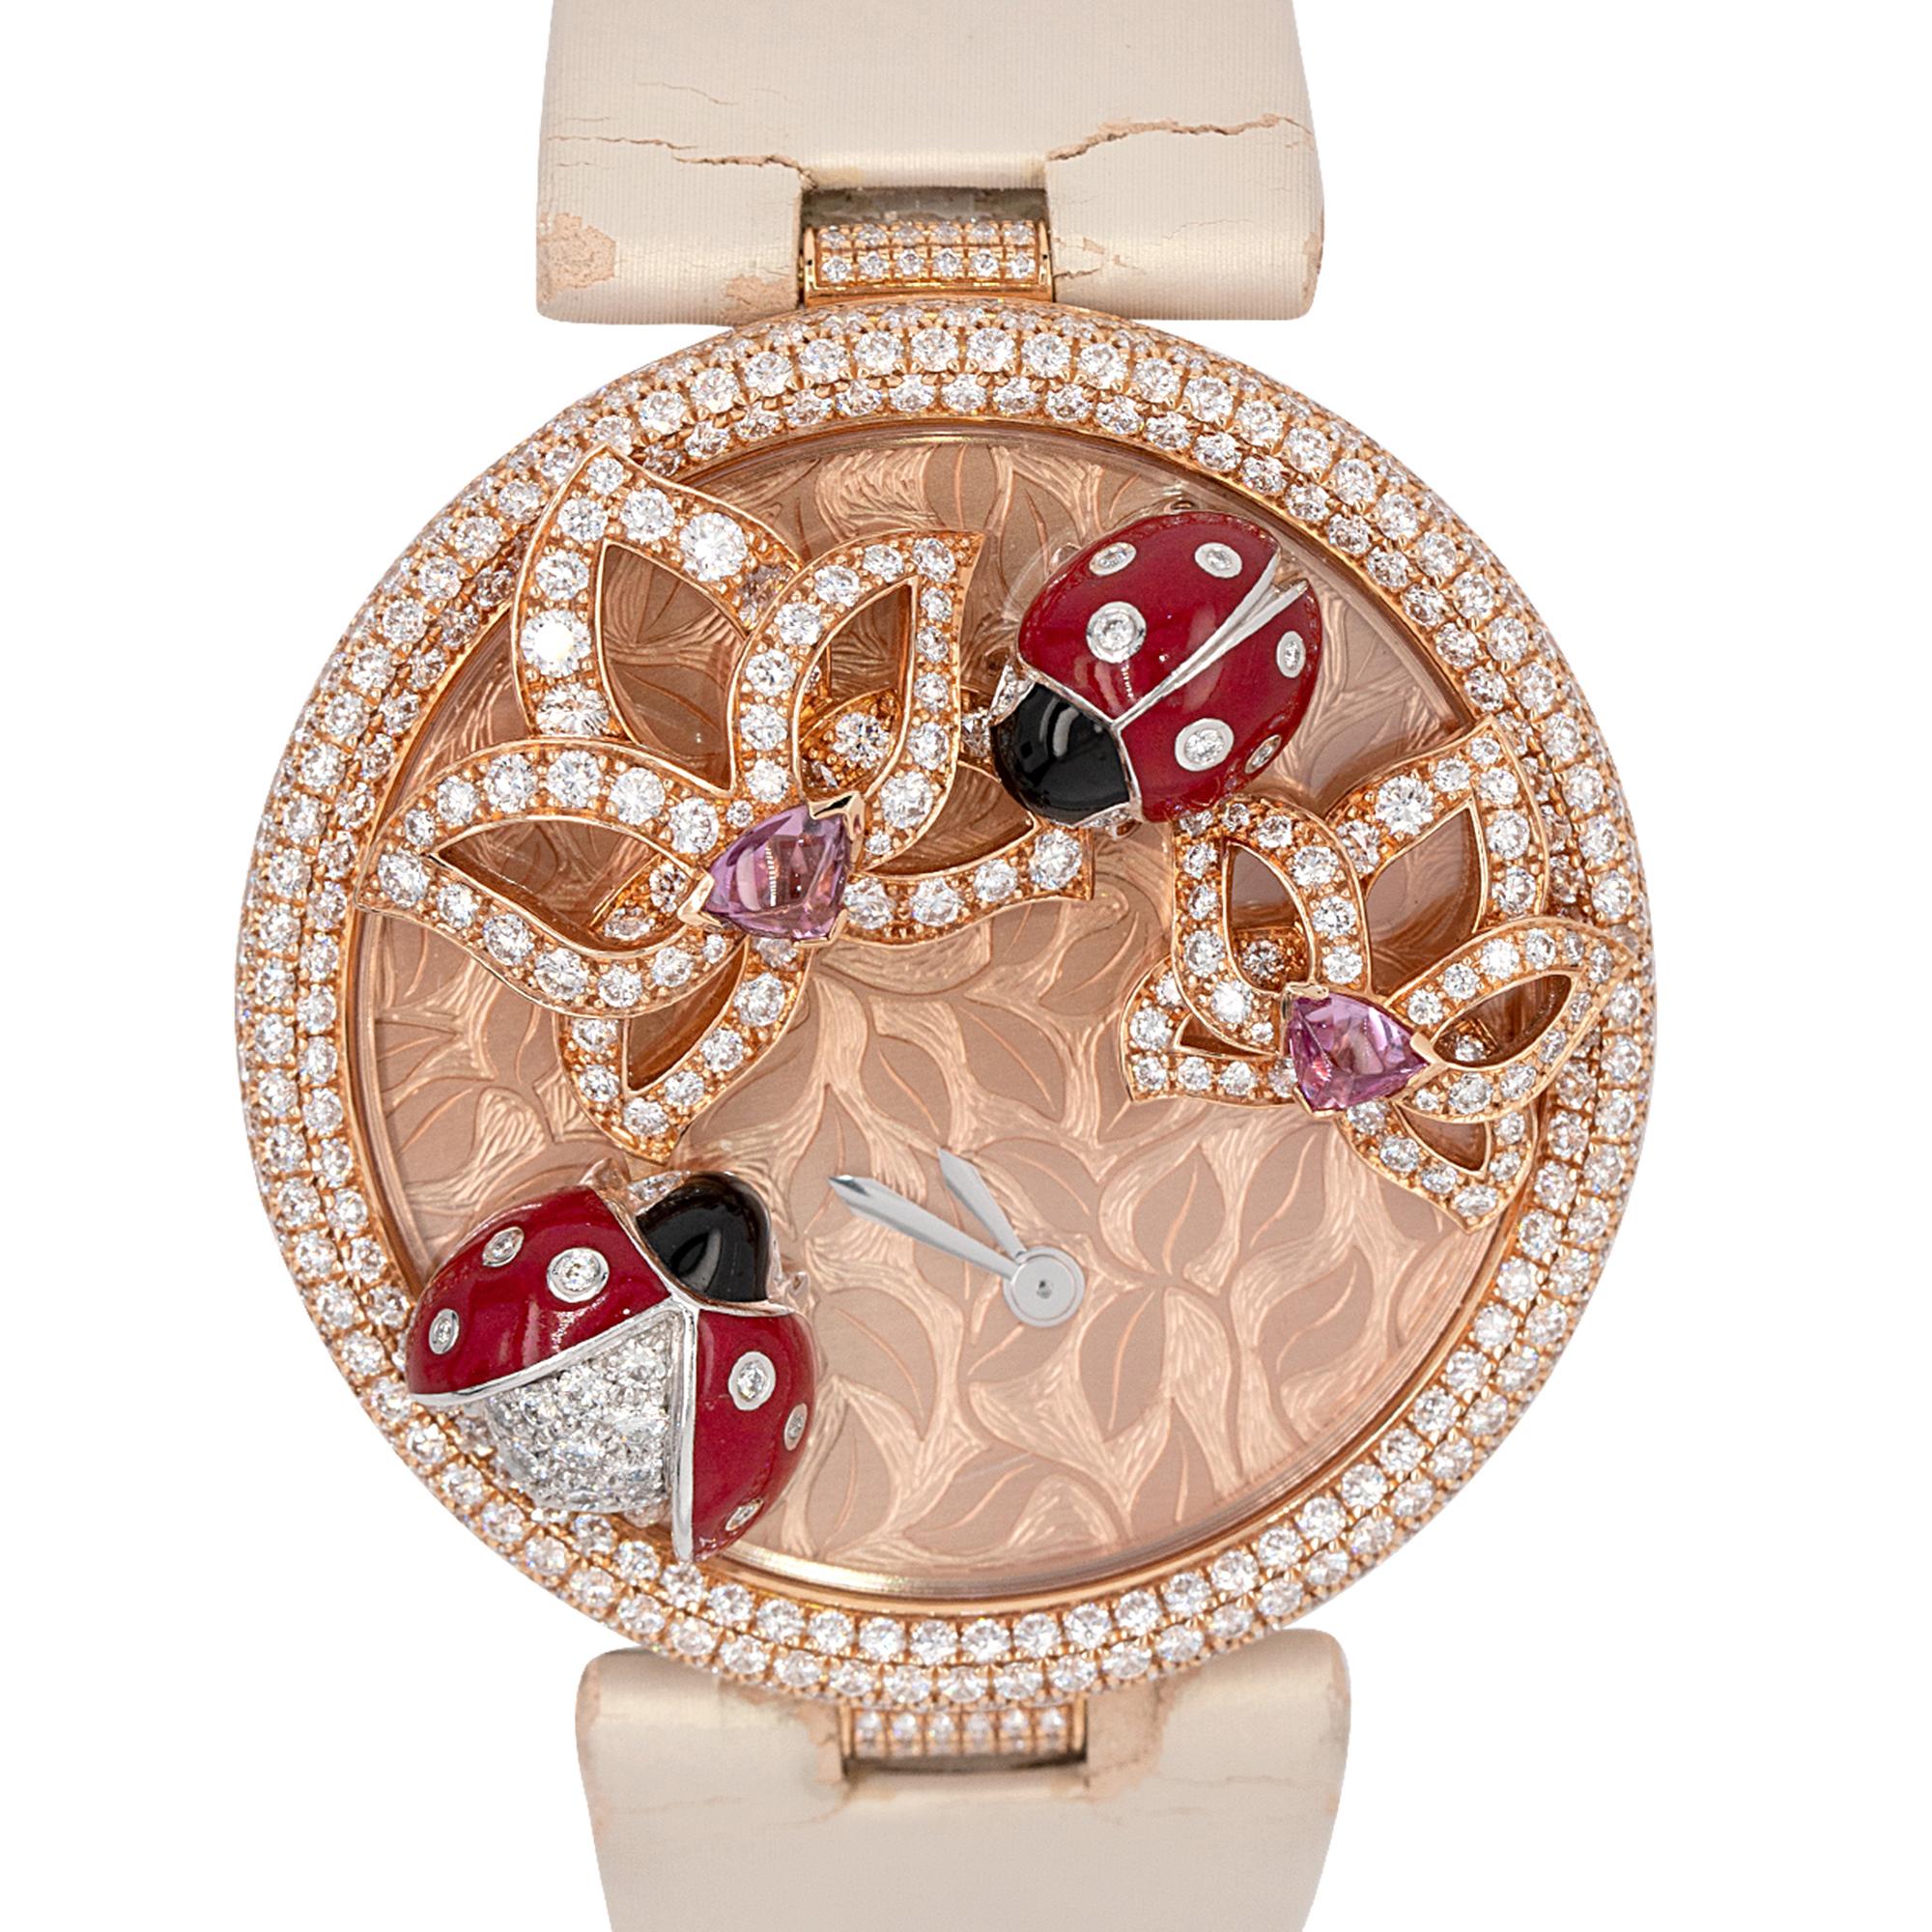 Indulge in luxury with the Cartier Le Cirque Animalier Coccinelles Ladies Watch. This exquisite timepiece features a 43mm case crafted from 18k rose gold, exuding elegance and sophistication. The bezel, also in 18k rose gold, is adorned with